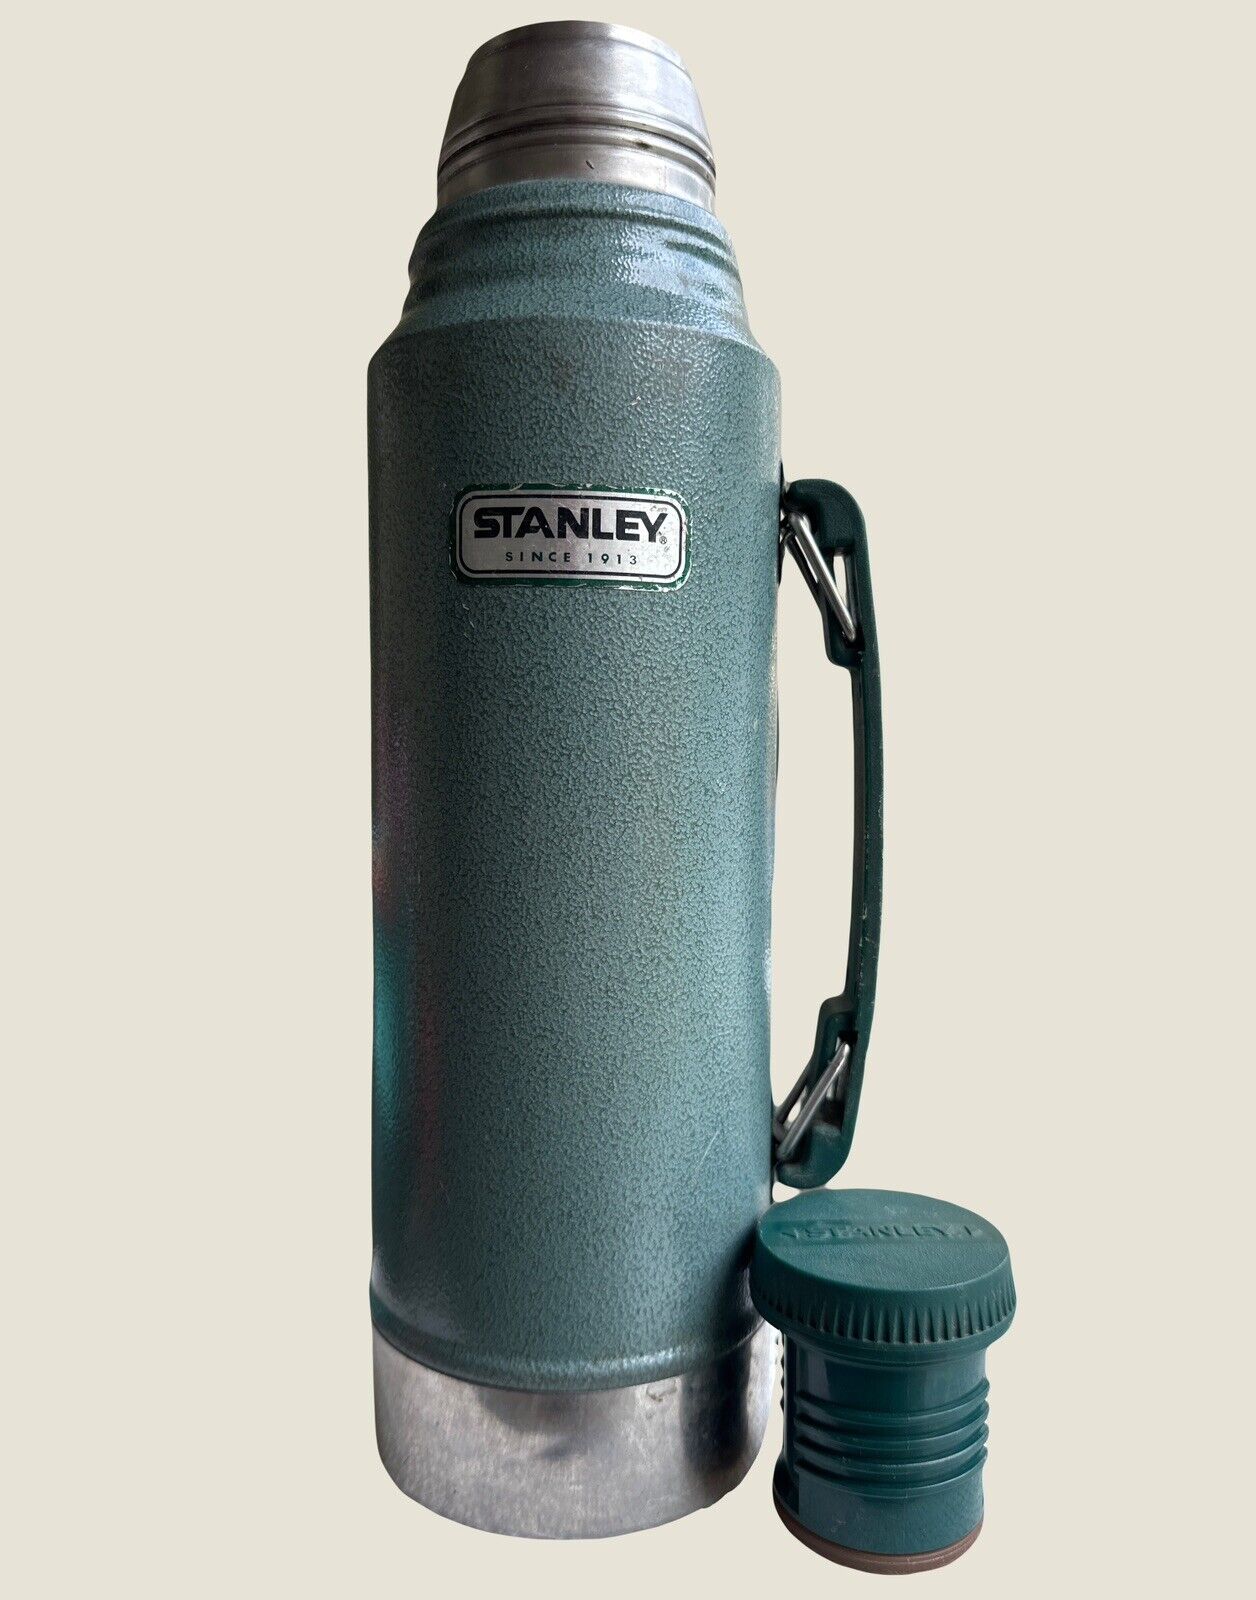 Vintage Stanley 1.1qt Insulated Thermos 20-00554 Classic Stainless Steel